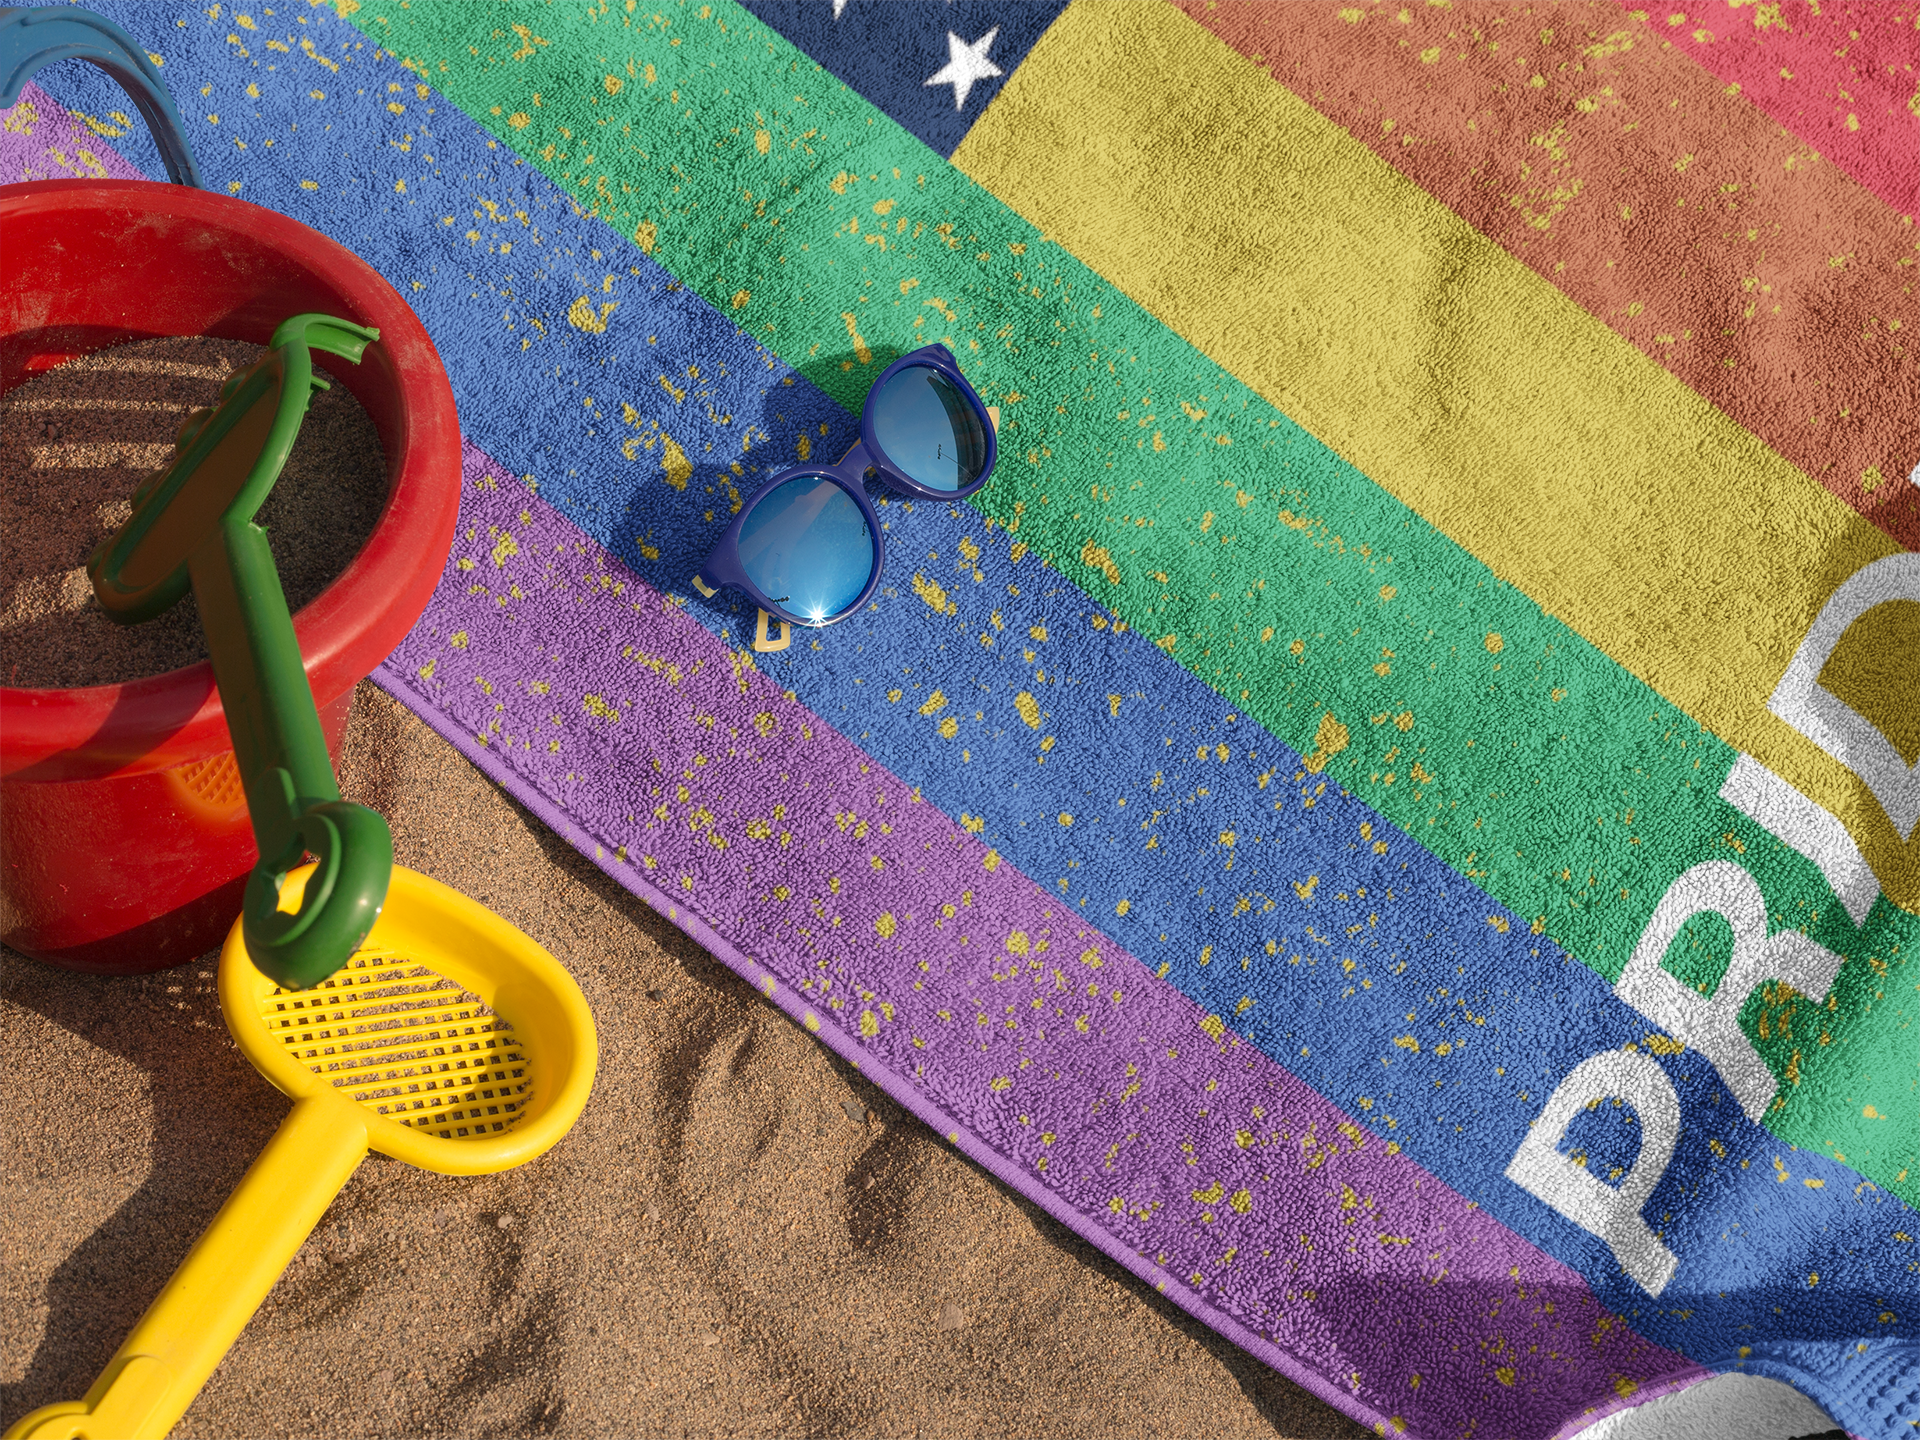 Pride Month Special Edition Beach Towel